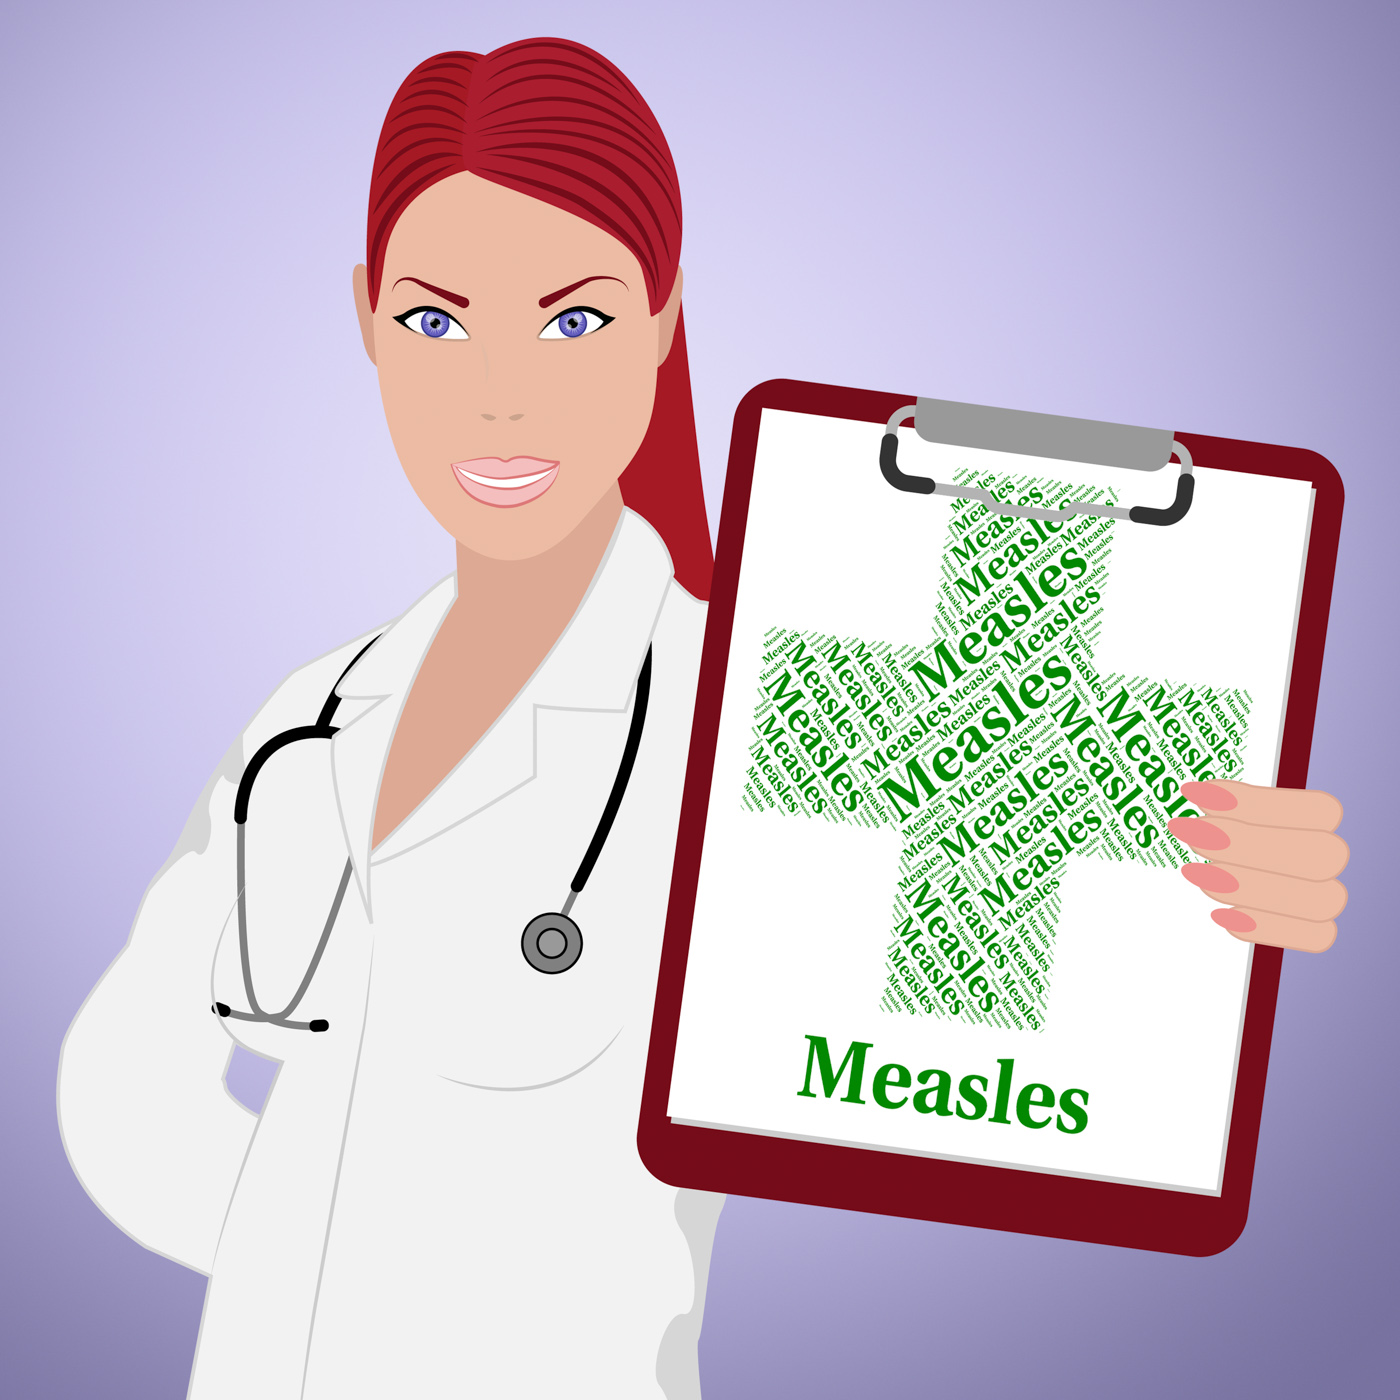 Measles word indicates poor health and ailment photo